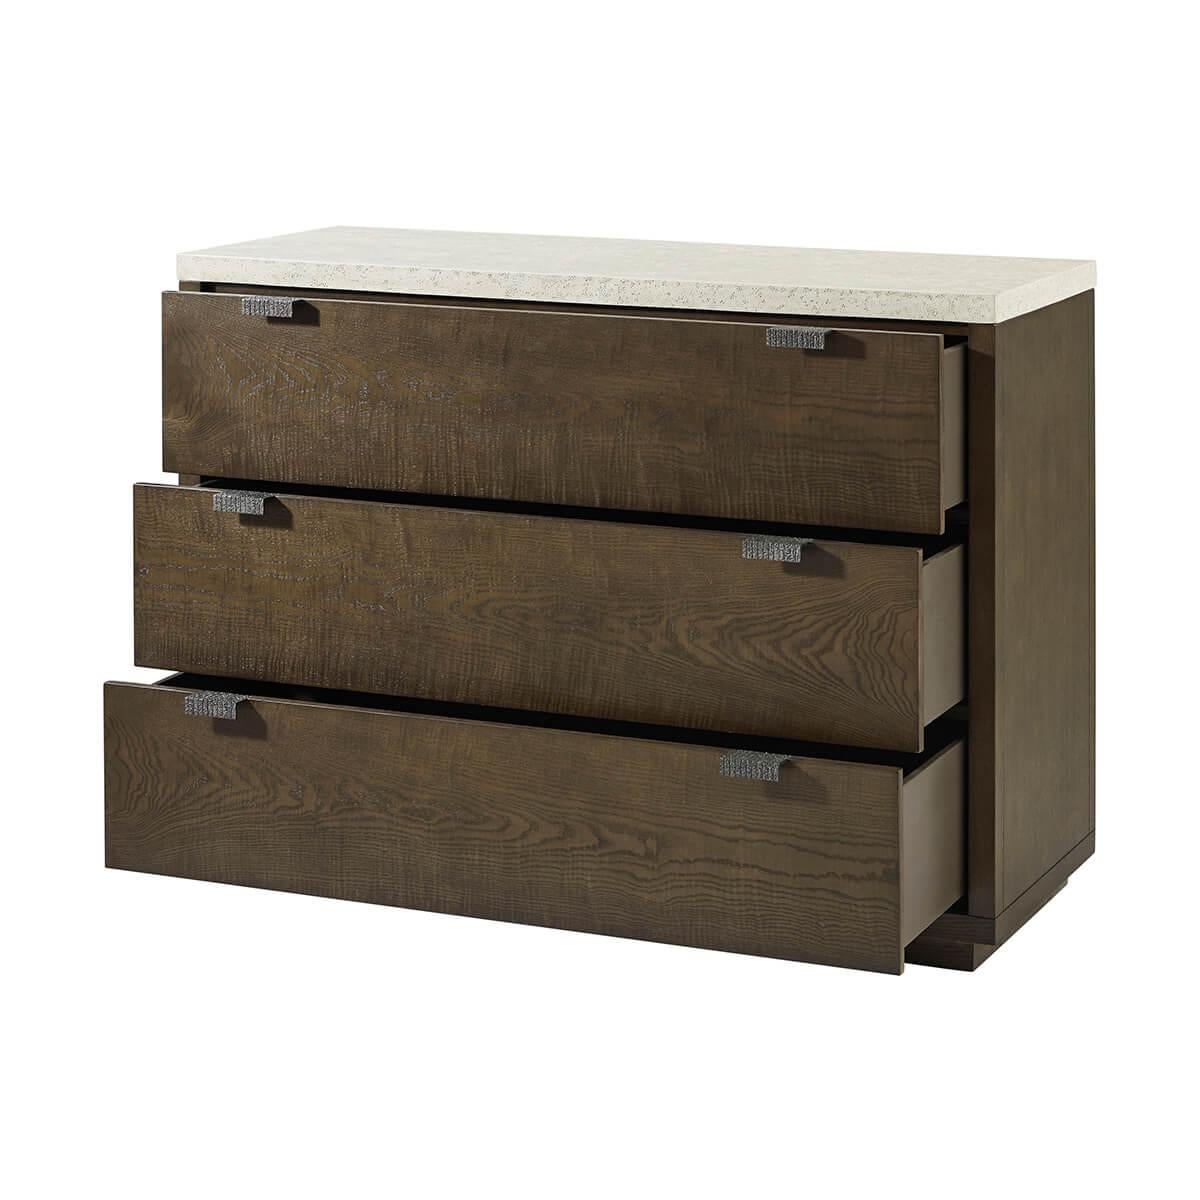 Made of figured cathedral ash in an artful grain pattern with soft close drawers. Finished in a dark earth color with metal pulls in an Ember color. The top is done in an exclusive porous Mineral finish.

Dimensions: 50